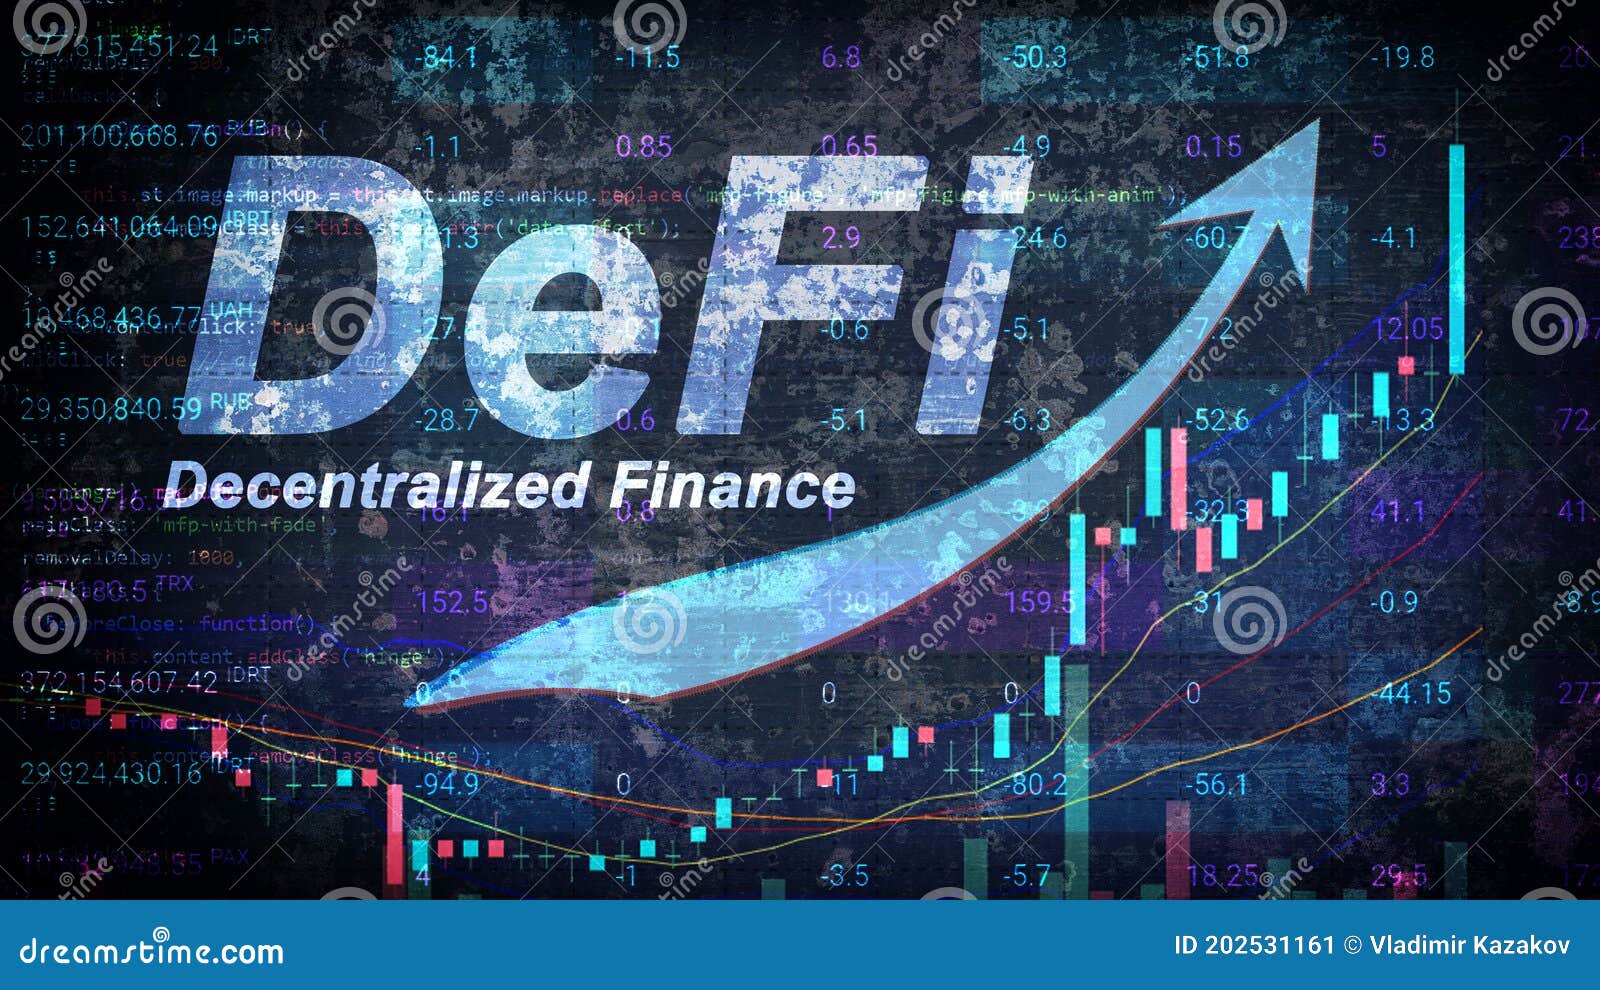 defi is a decentralized finance that is gaining popularity and hype.